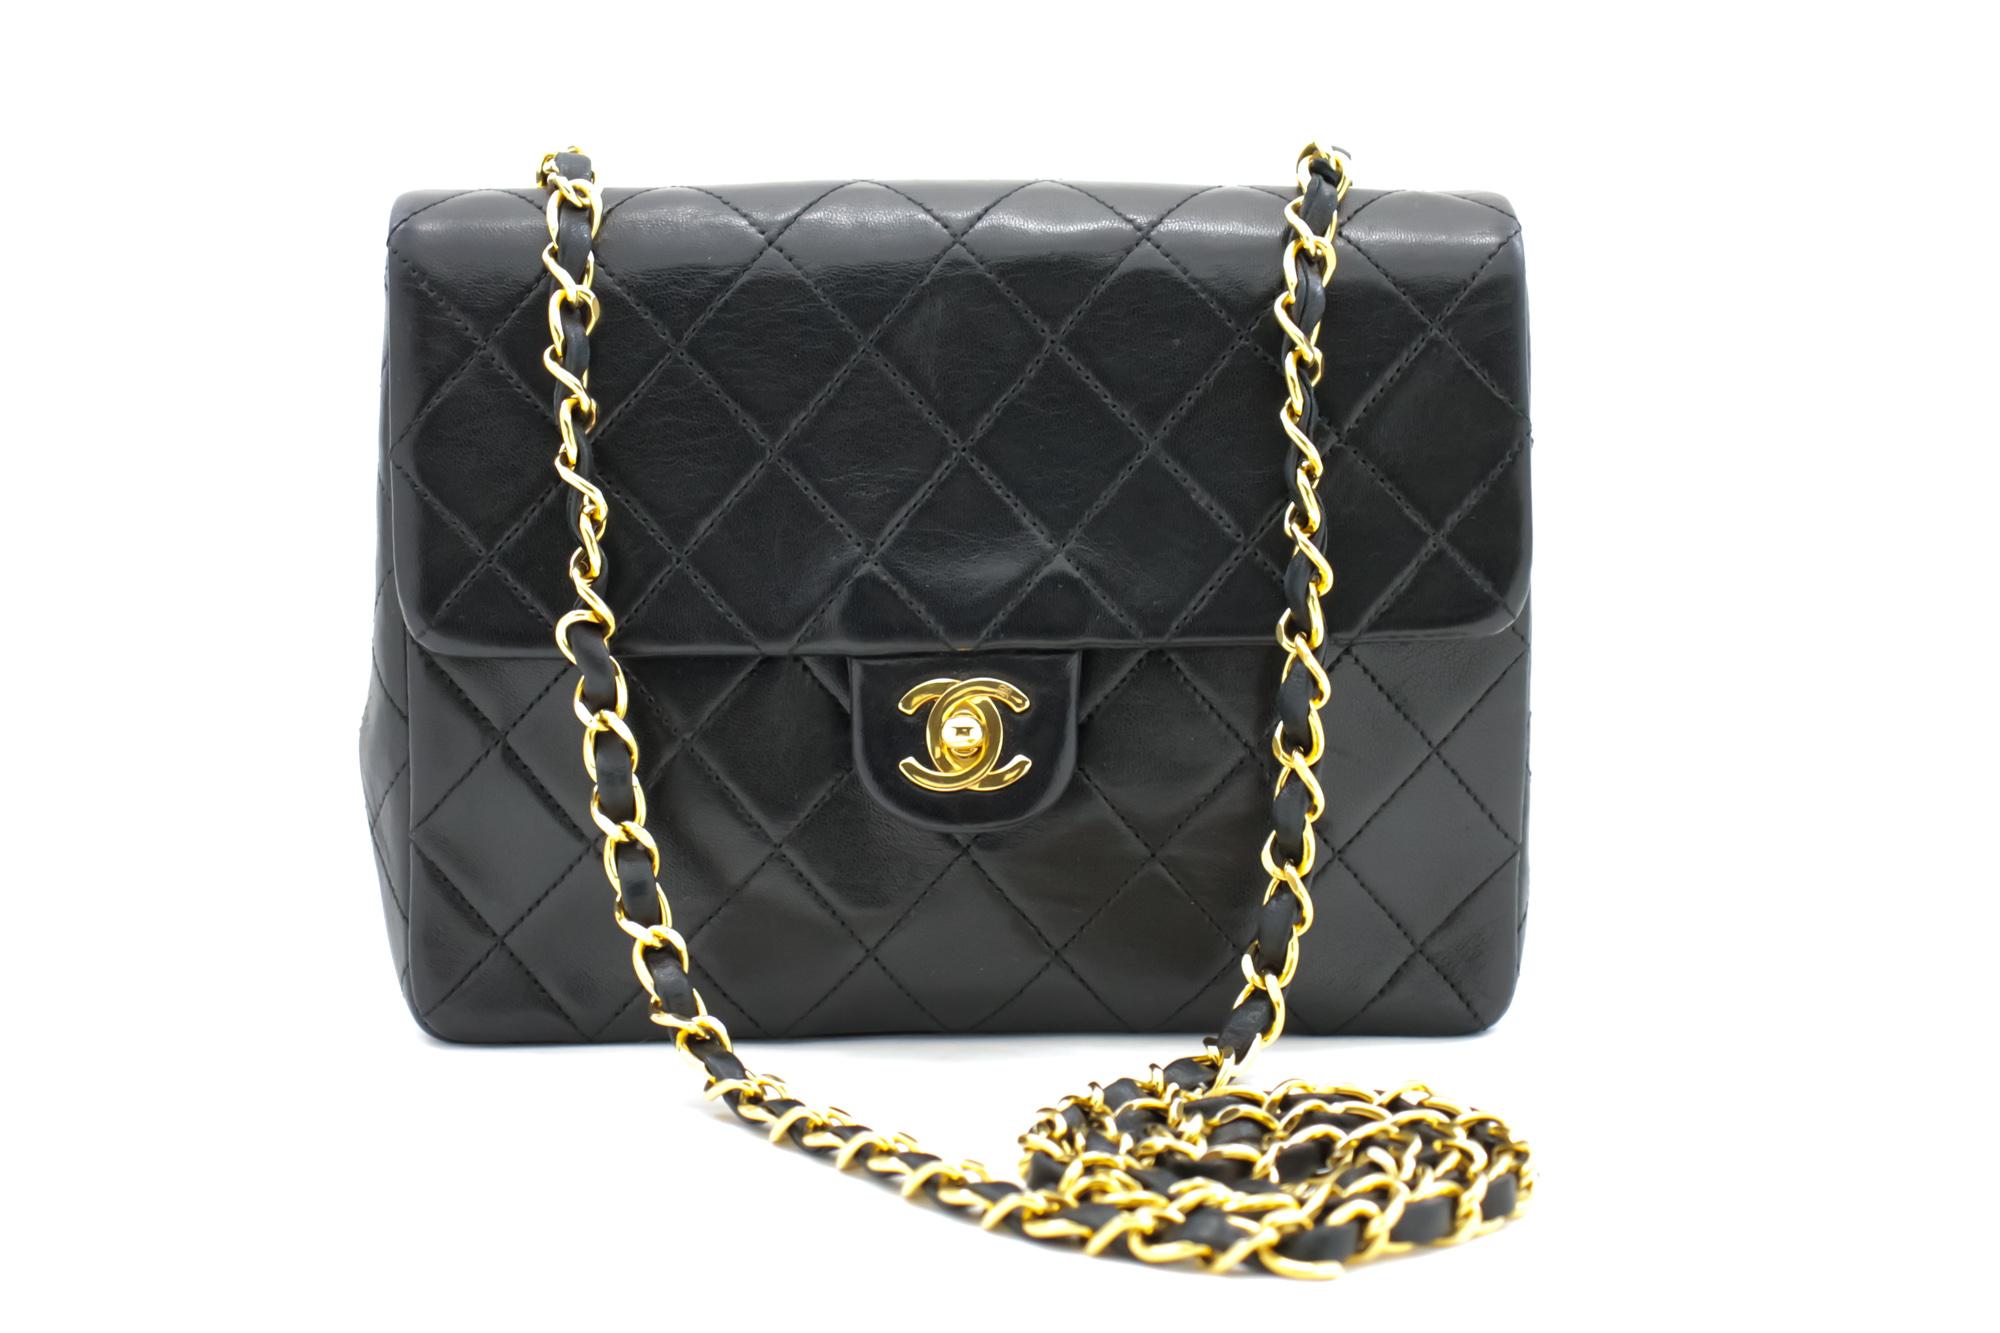 An authentic CHANEL Mini Square Small Chain Shoulder Bag Crossbody Black Quilt. The color is Black. The outside material is Leather. The pattern is Solid. This item is Vintage / Classic. The year of manufacture would be 1994-1996.
Conditions &